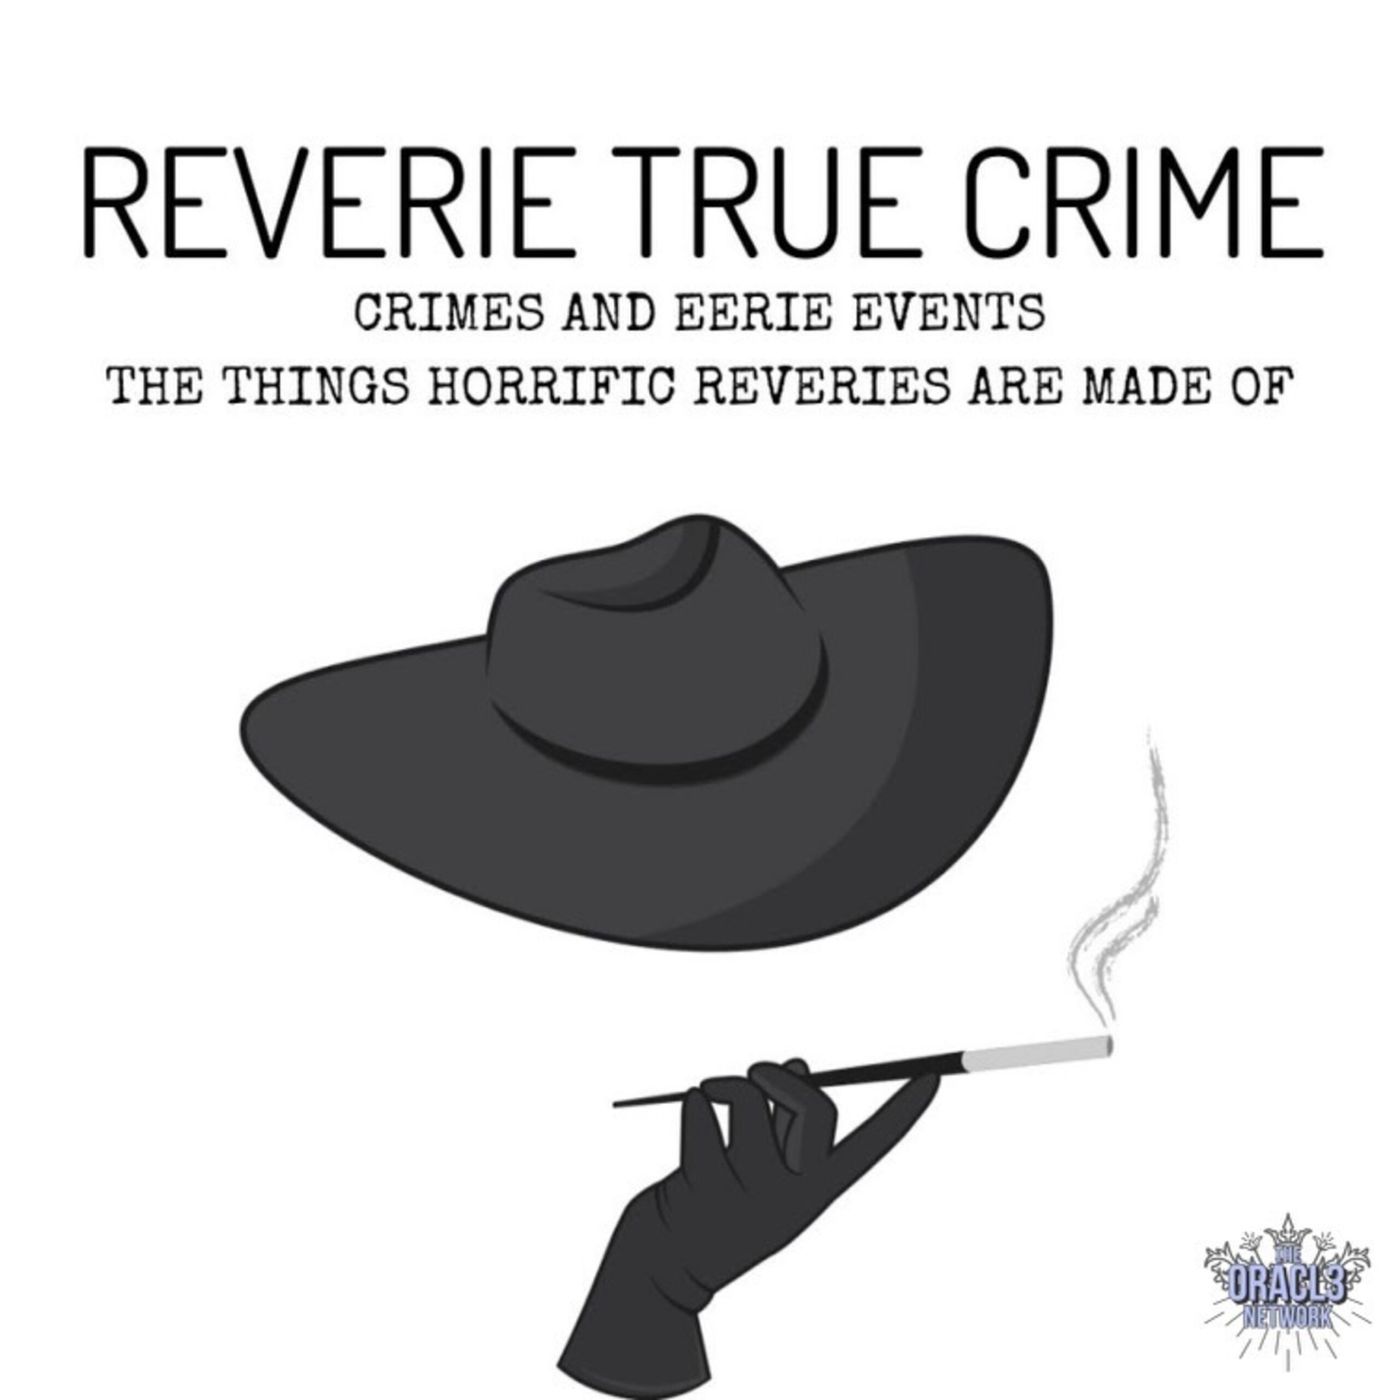 The Murders of Stacey Mitchell and Edward Baldock in Australia by Reverie True Crime featuring Beyond the Rainbow